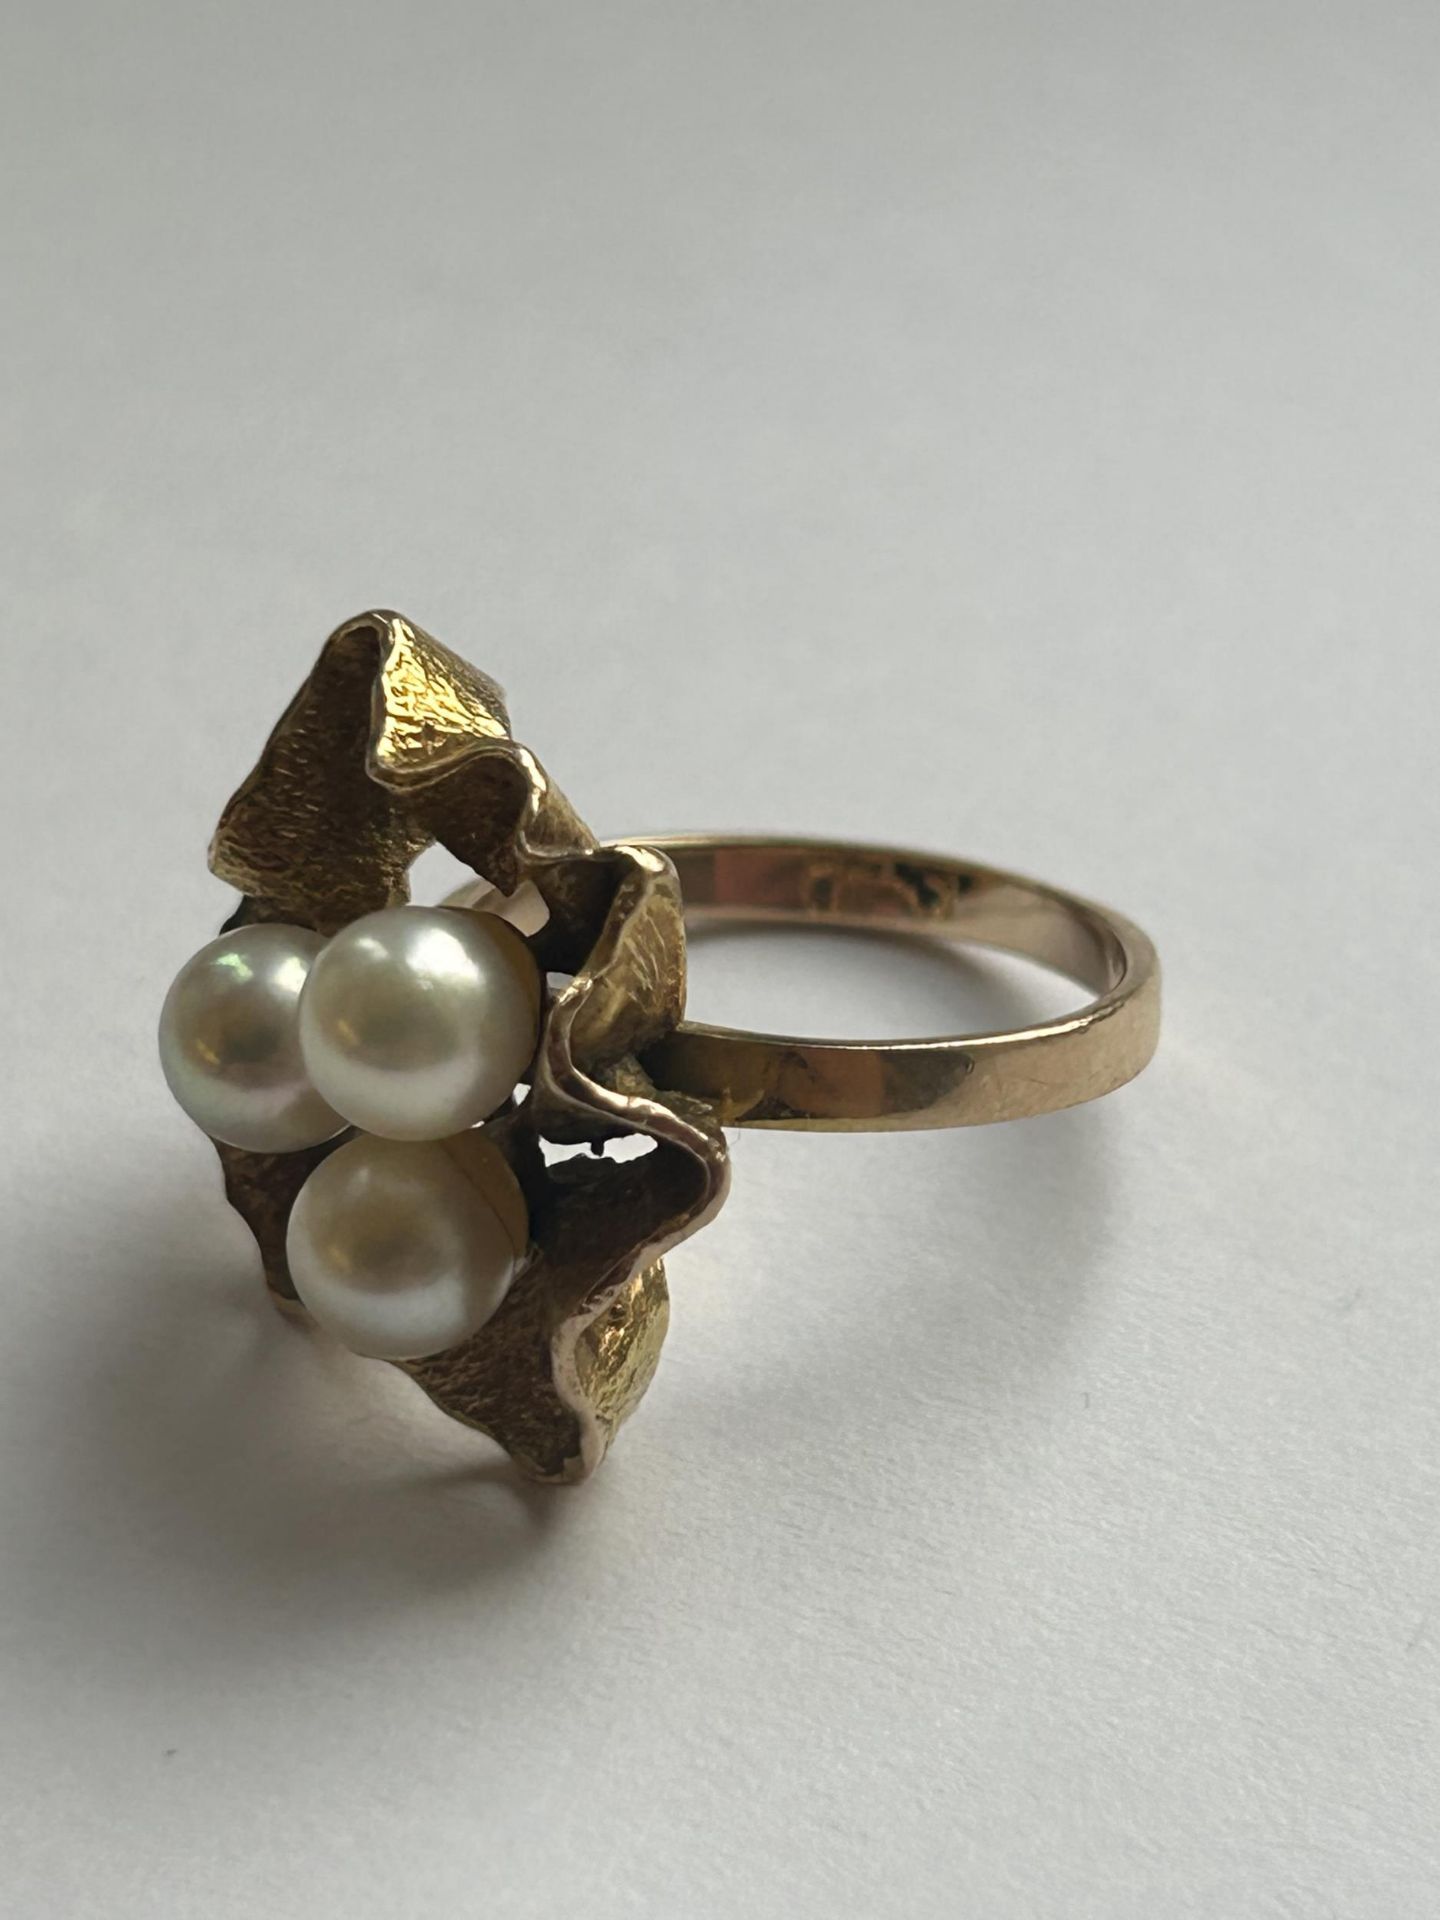 A 9CT YELLOW GOLD AND PEARL RING SIZE K, WEIGHT 4.44 GRAMS - Image 2 of 4